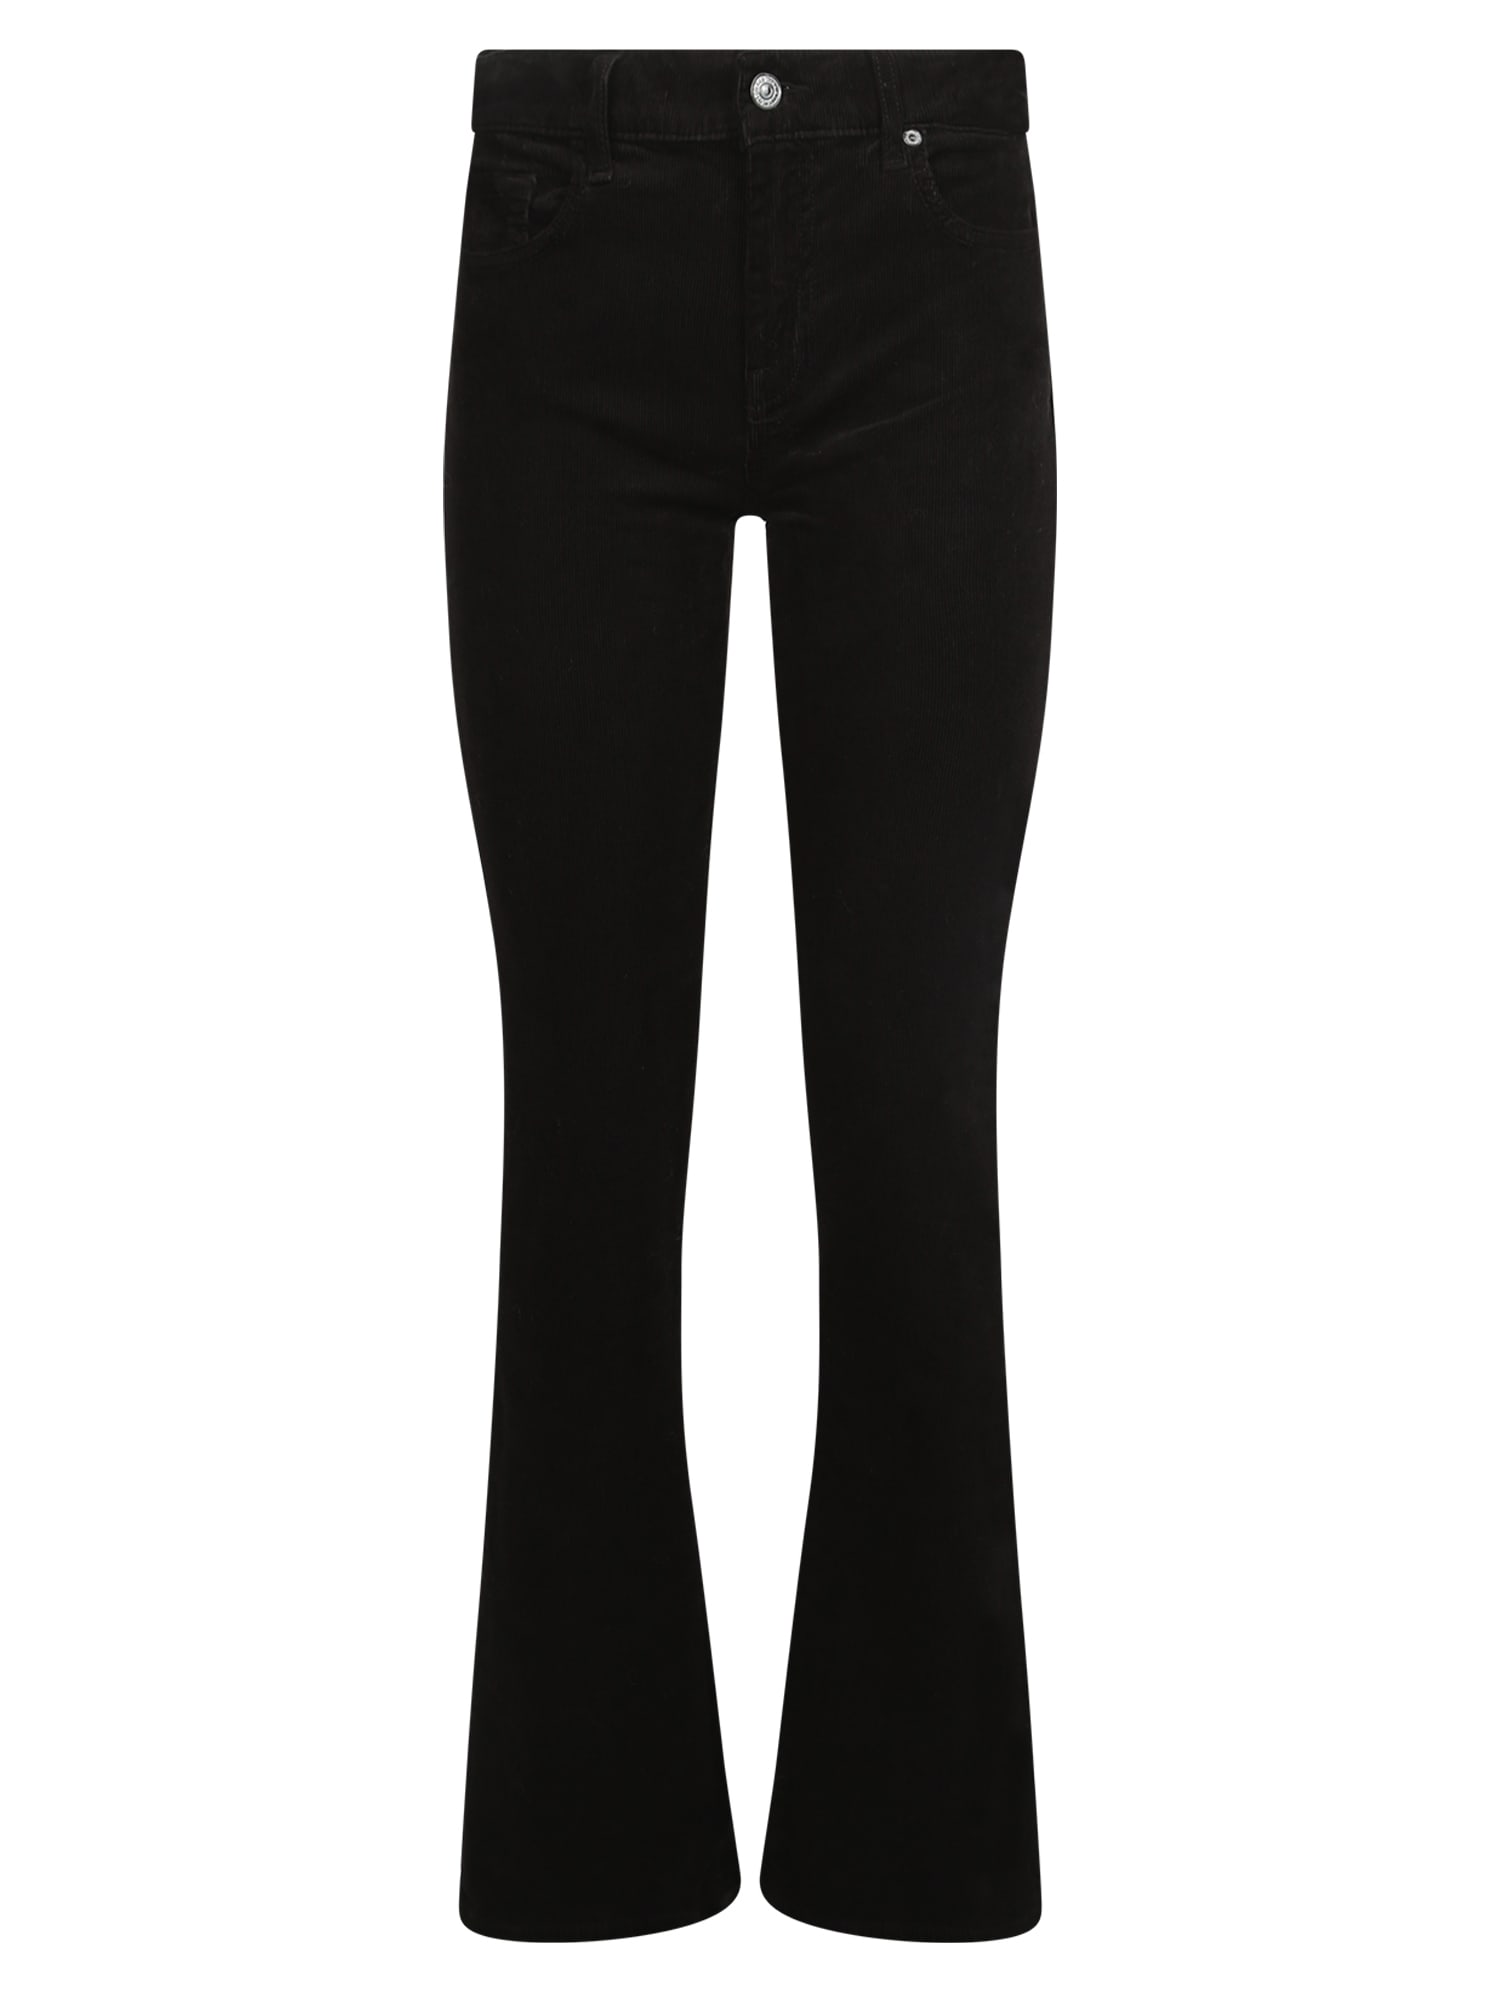 7 For All Mankind Flared Trousers